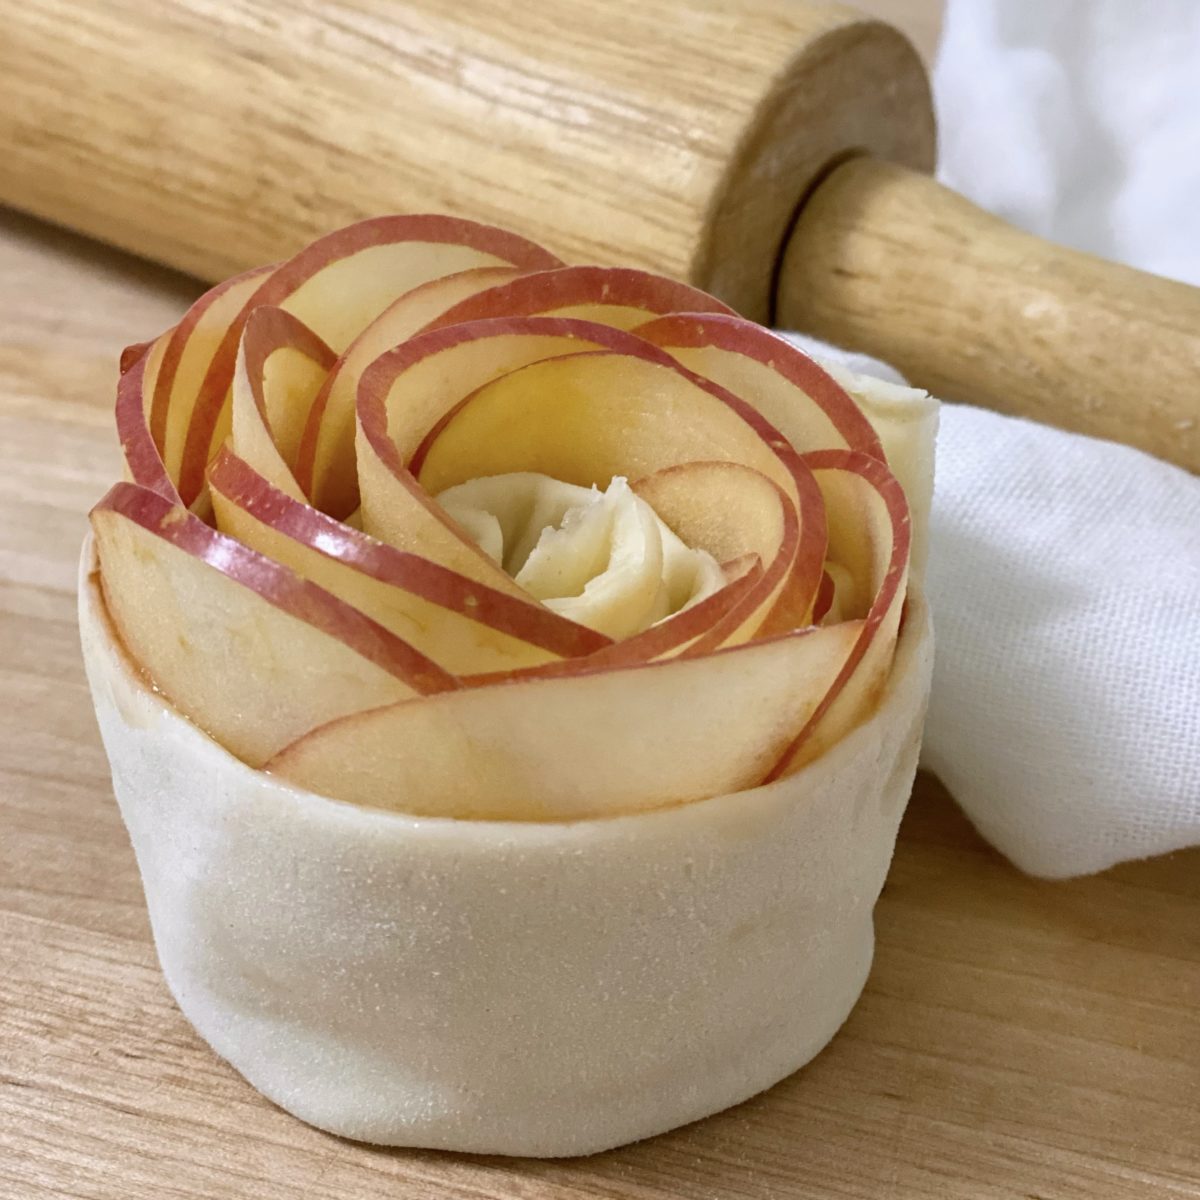 Single baked apple rose rolled up and ready to go in the muffin pan for baking.